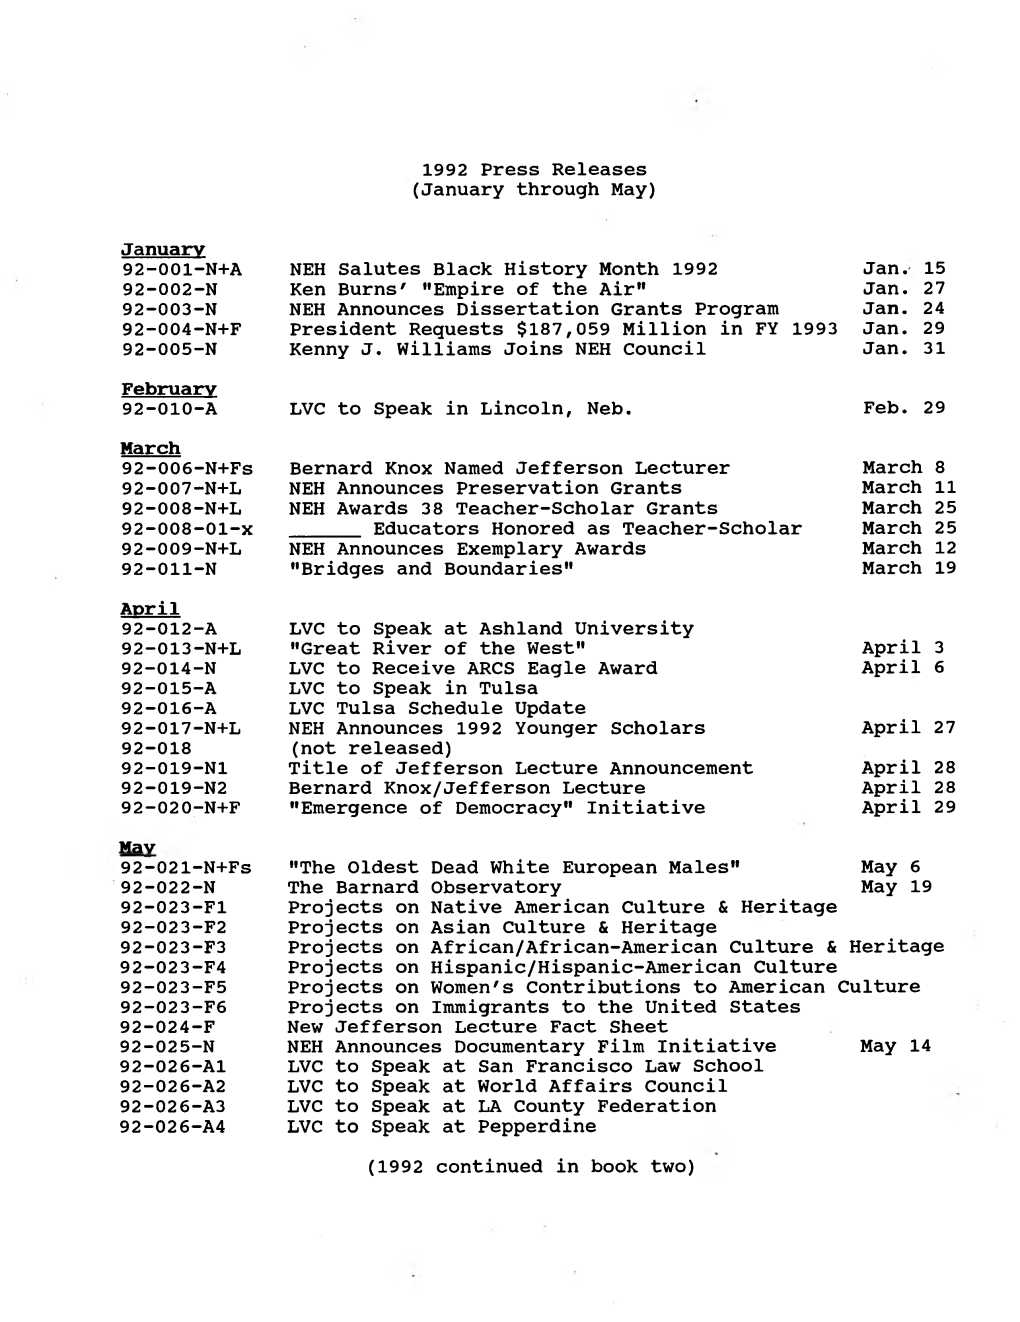 1992 Press Releases (January Through May)